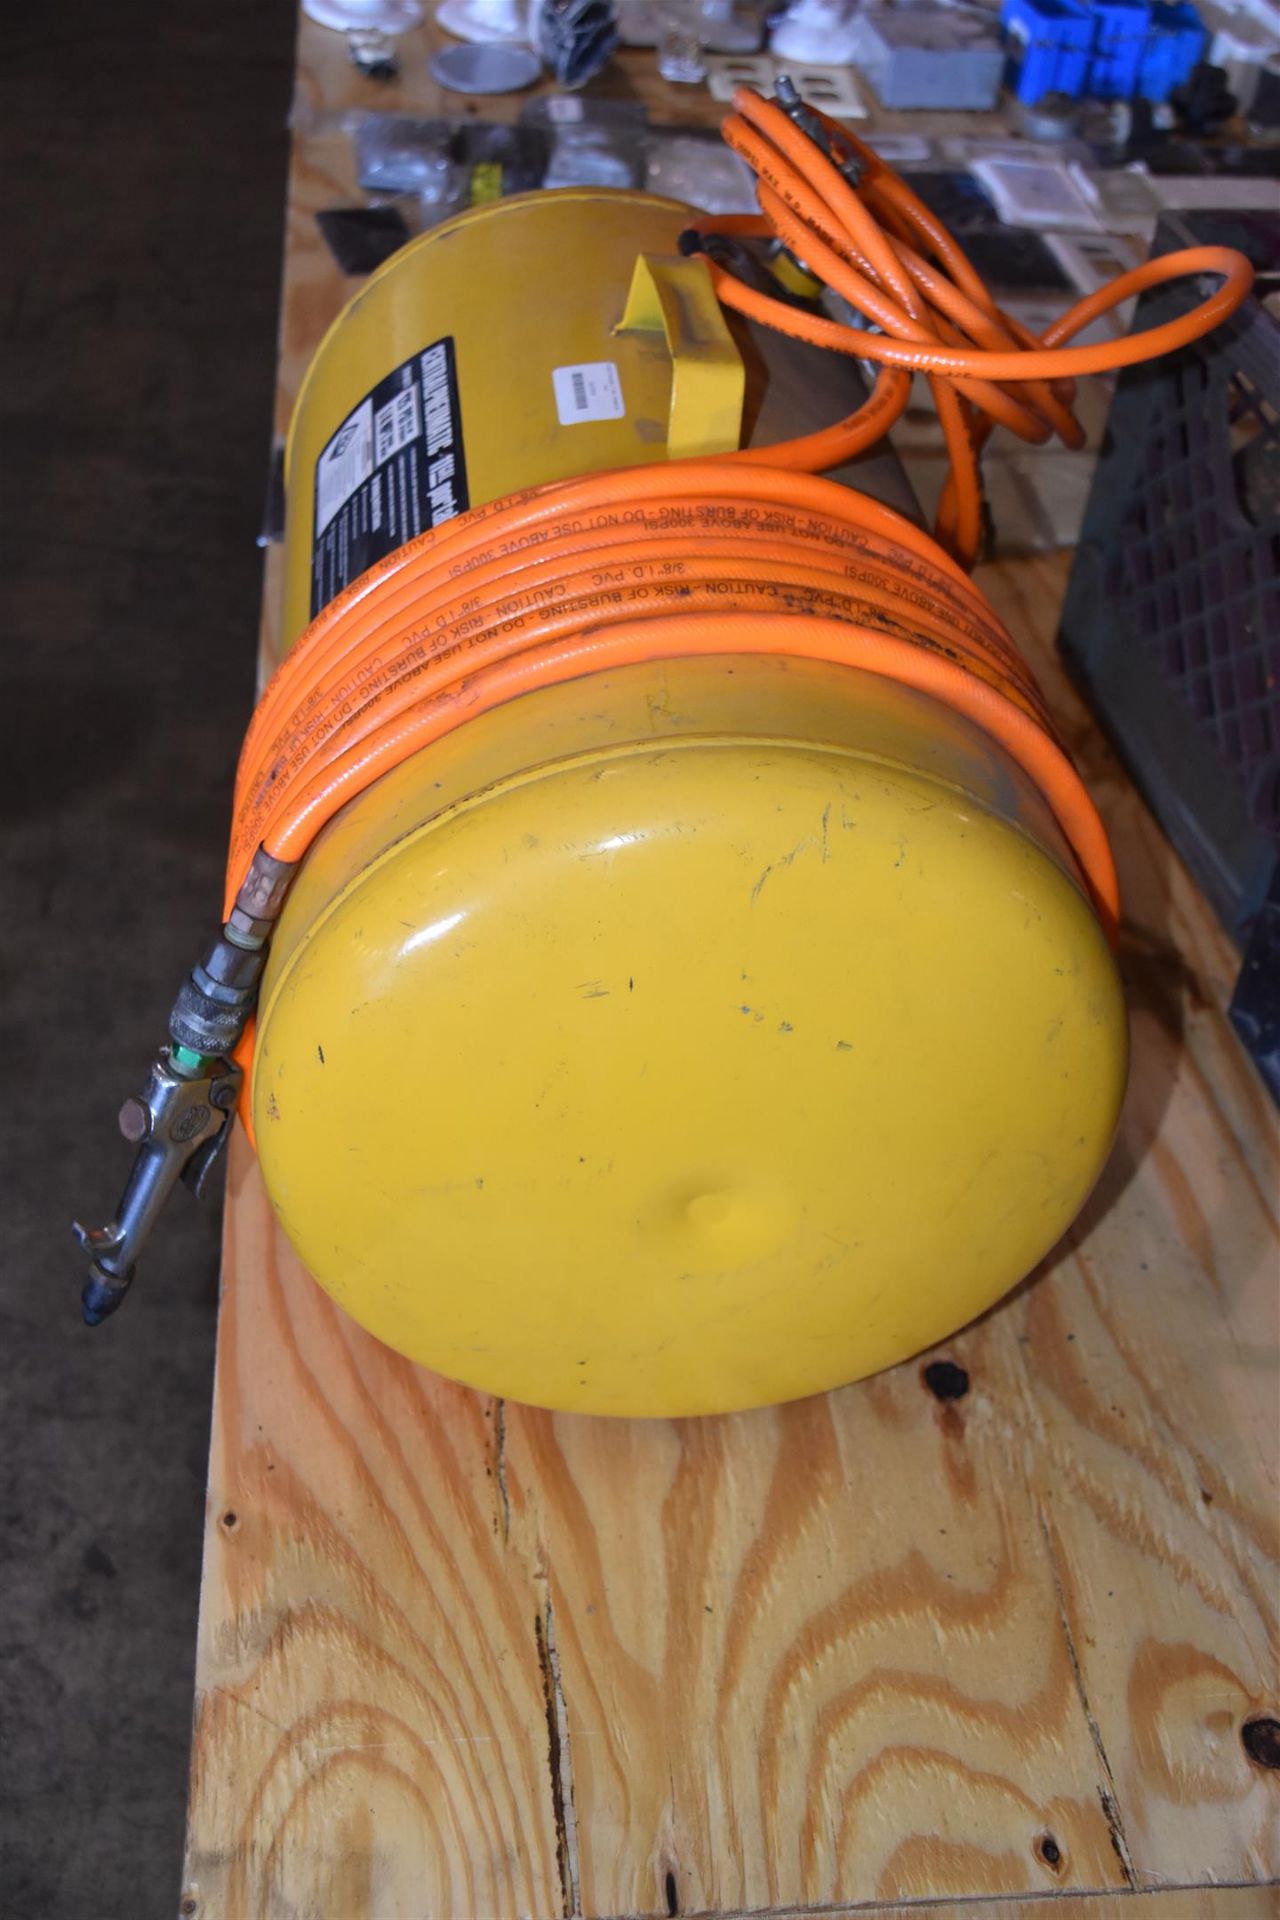 Central Pneumatic 11 GAL. Portable Air Tank - Image 4 of 5